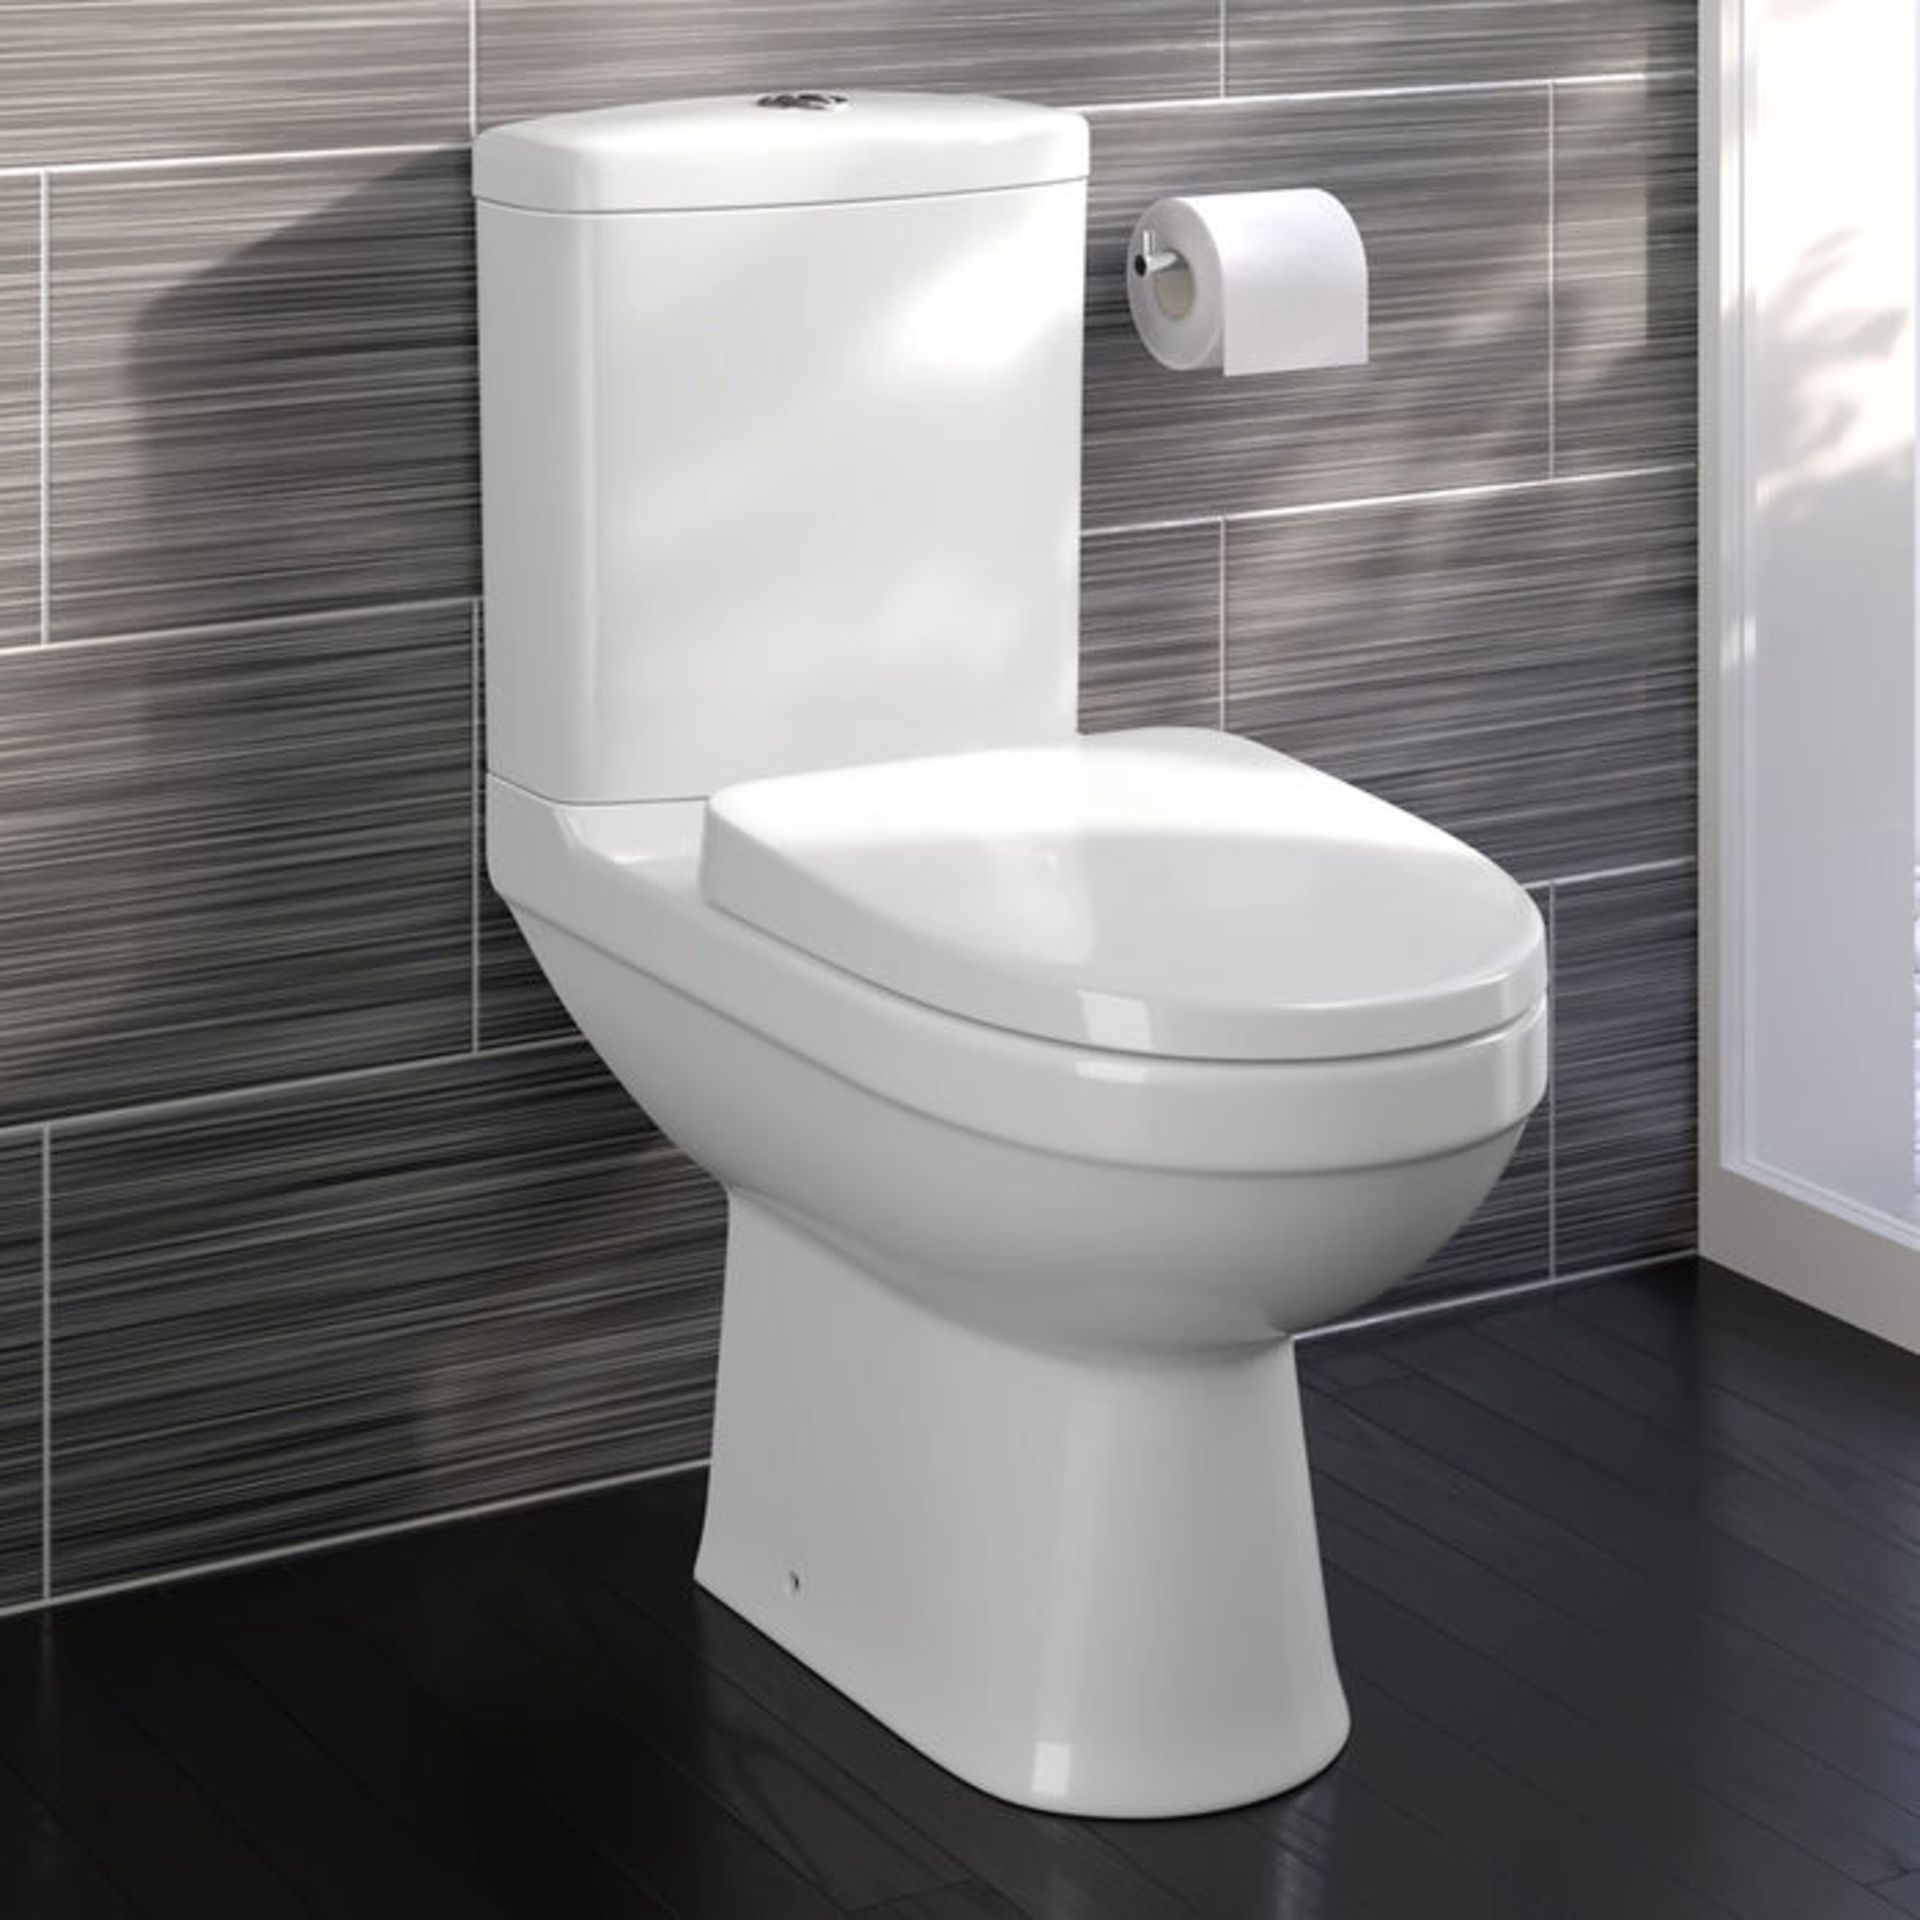 (AL180) Sabrosa II Close Coupled Toilet & Cistern inc Soft Close Seat. Made from White Vitreous